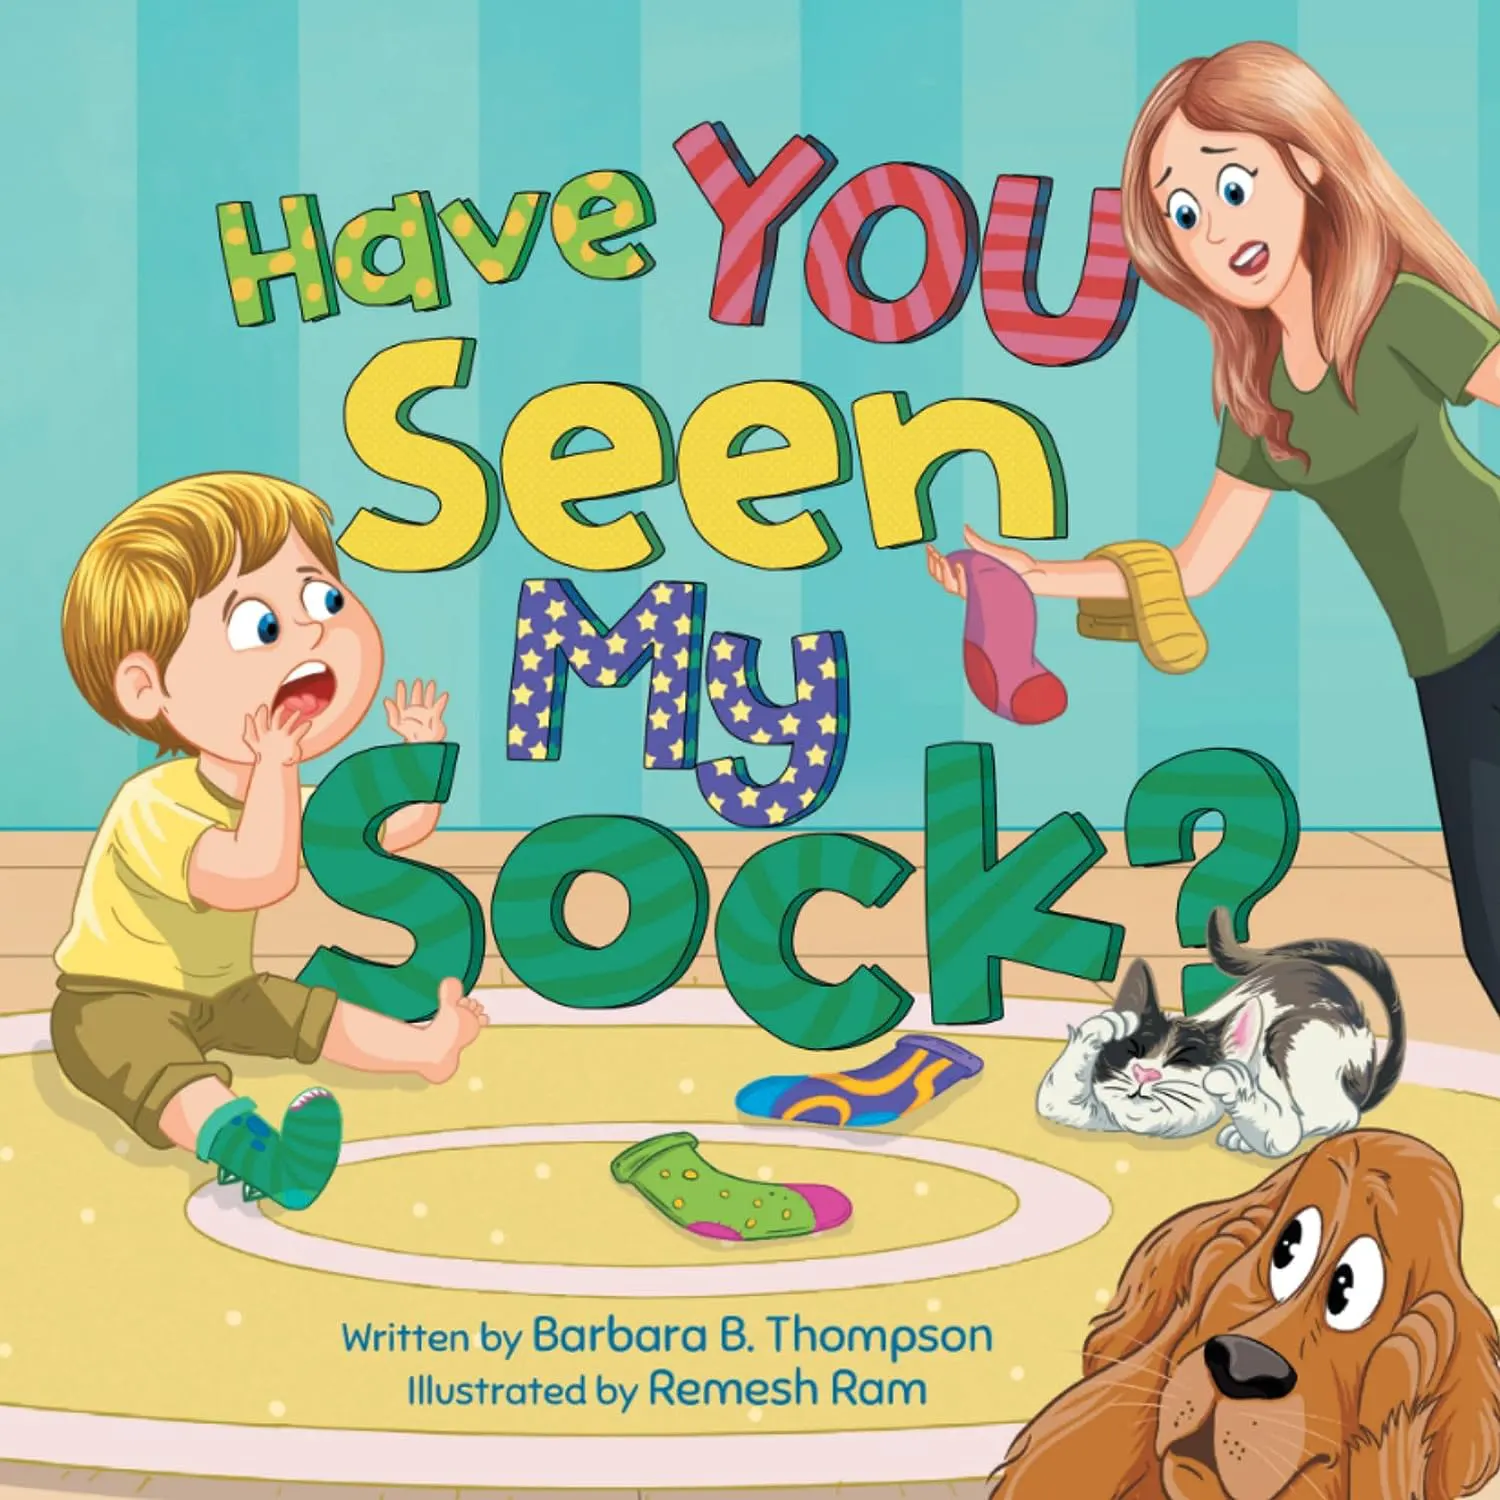 Have YOU Seen My Sock?